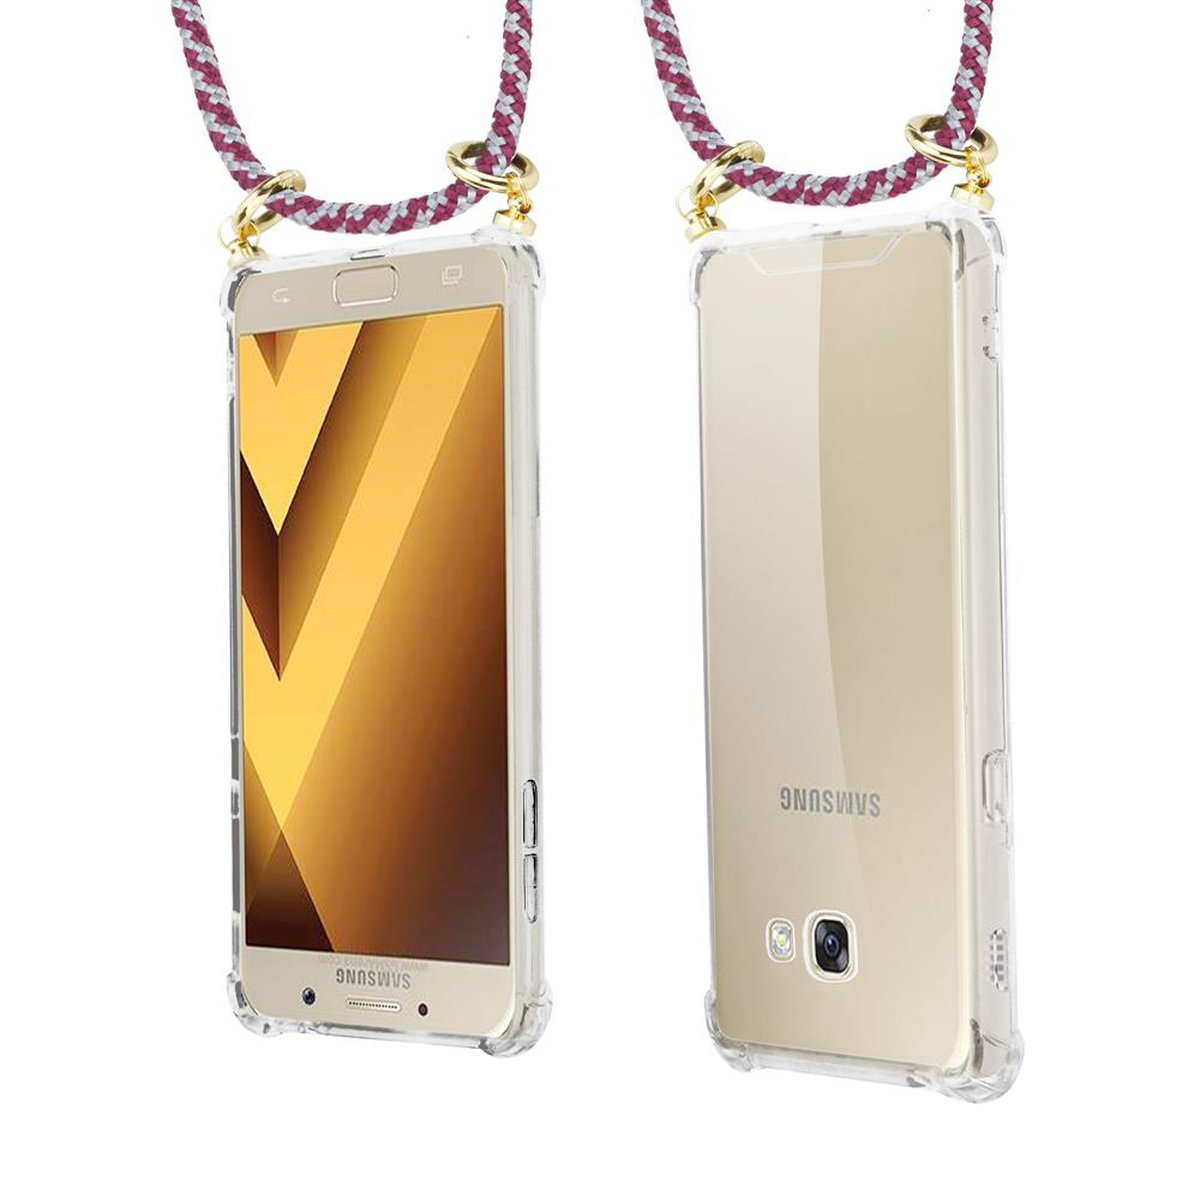 und Band Ringen, WEIß Galaxy Hülle, mit abnehmbarer Backcover, Kordel Kette Handy Gold Samsung, A5 2017, CADORABO ROT